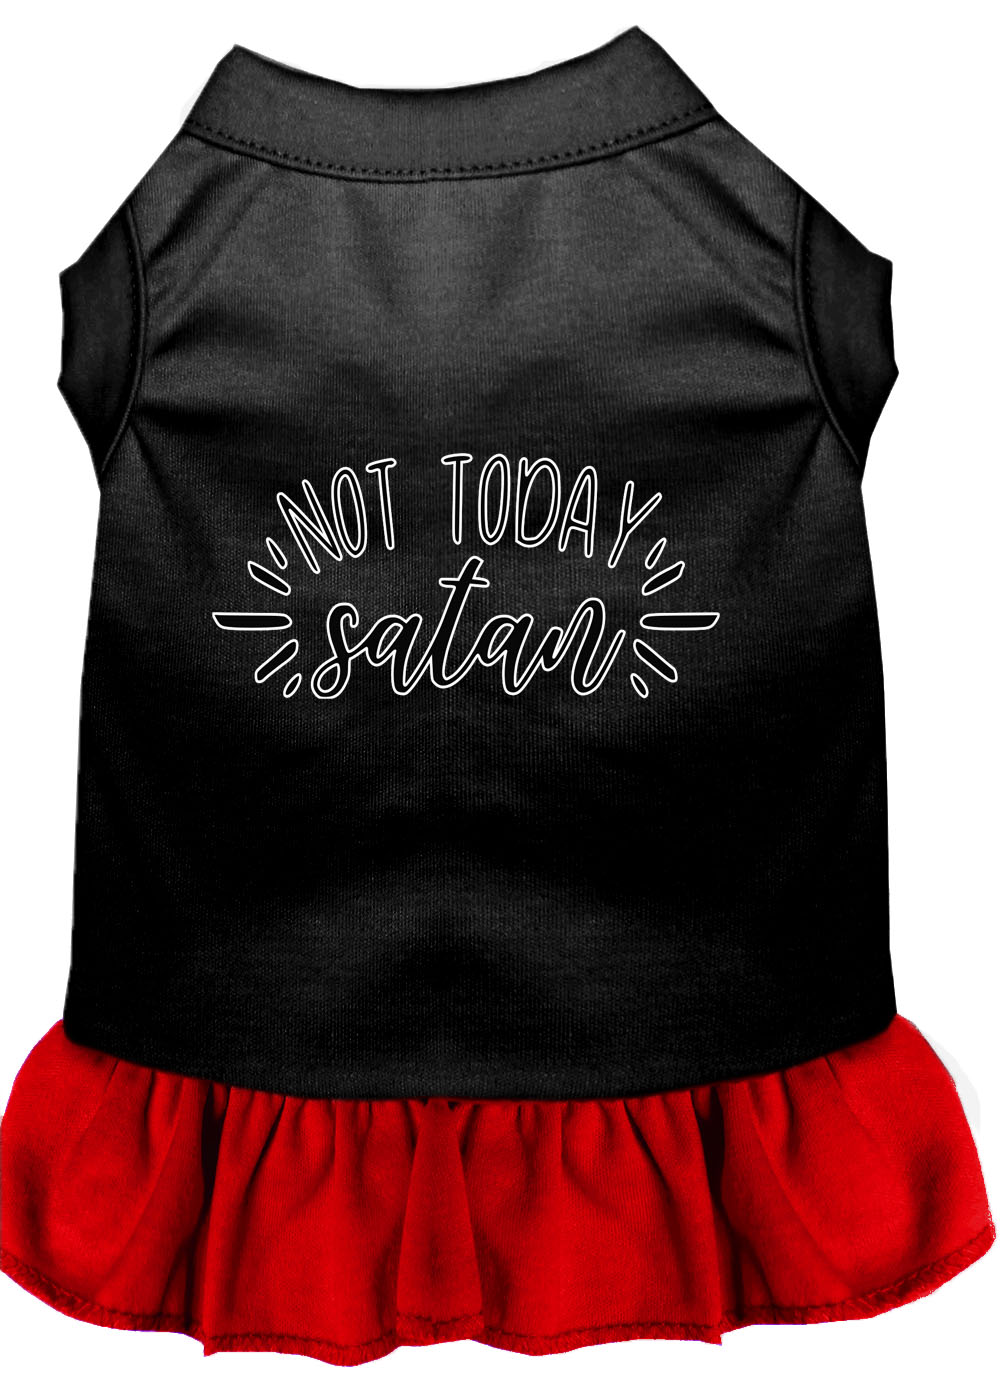 Not Today Satan Screen Print Dog Dress Black with Red Lg